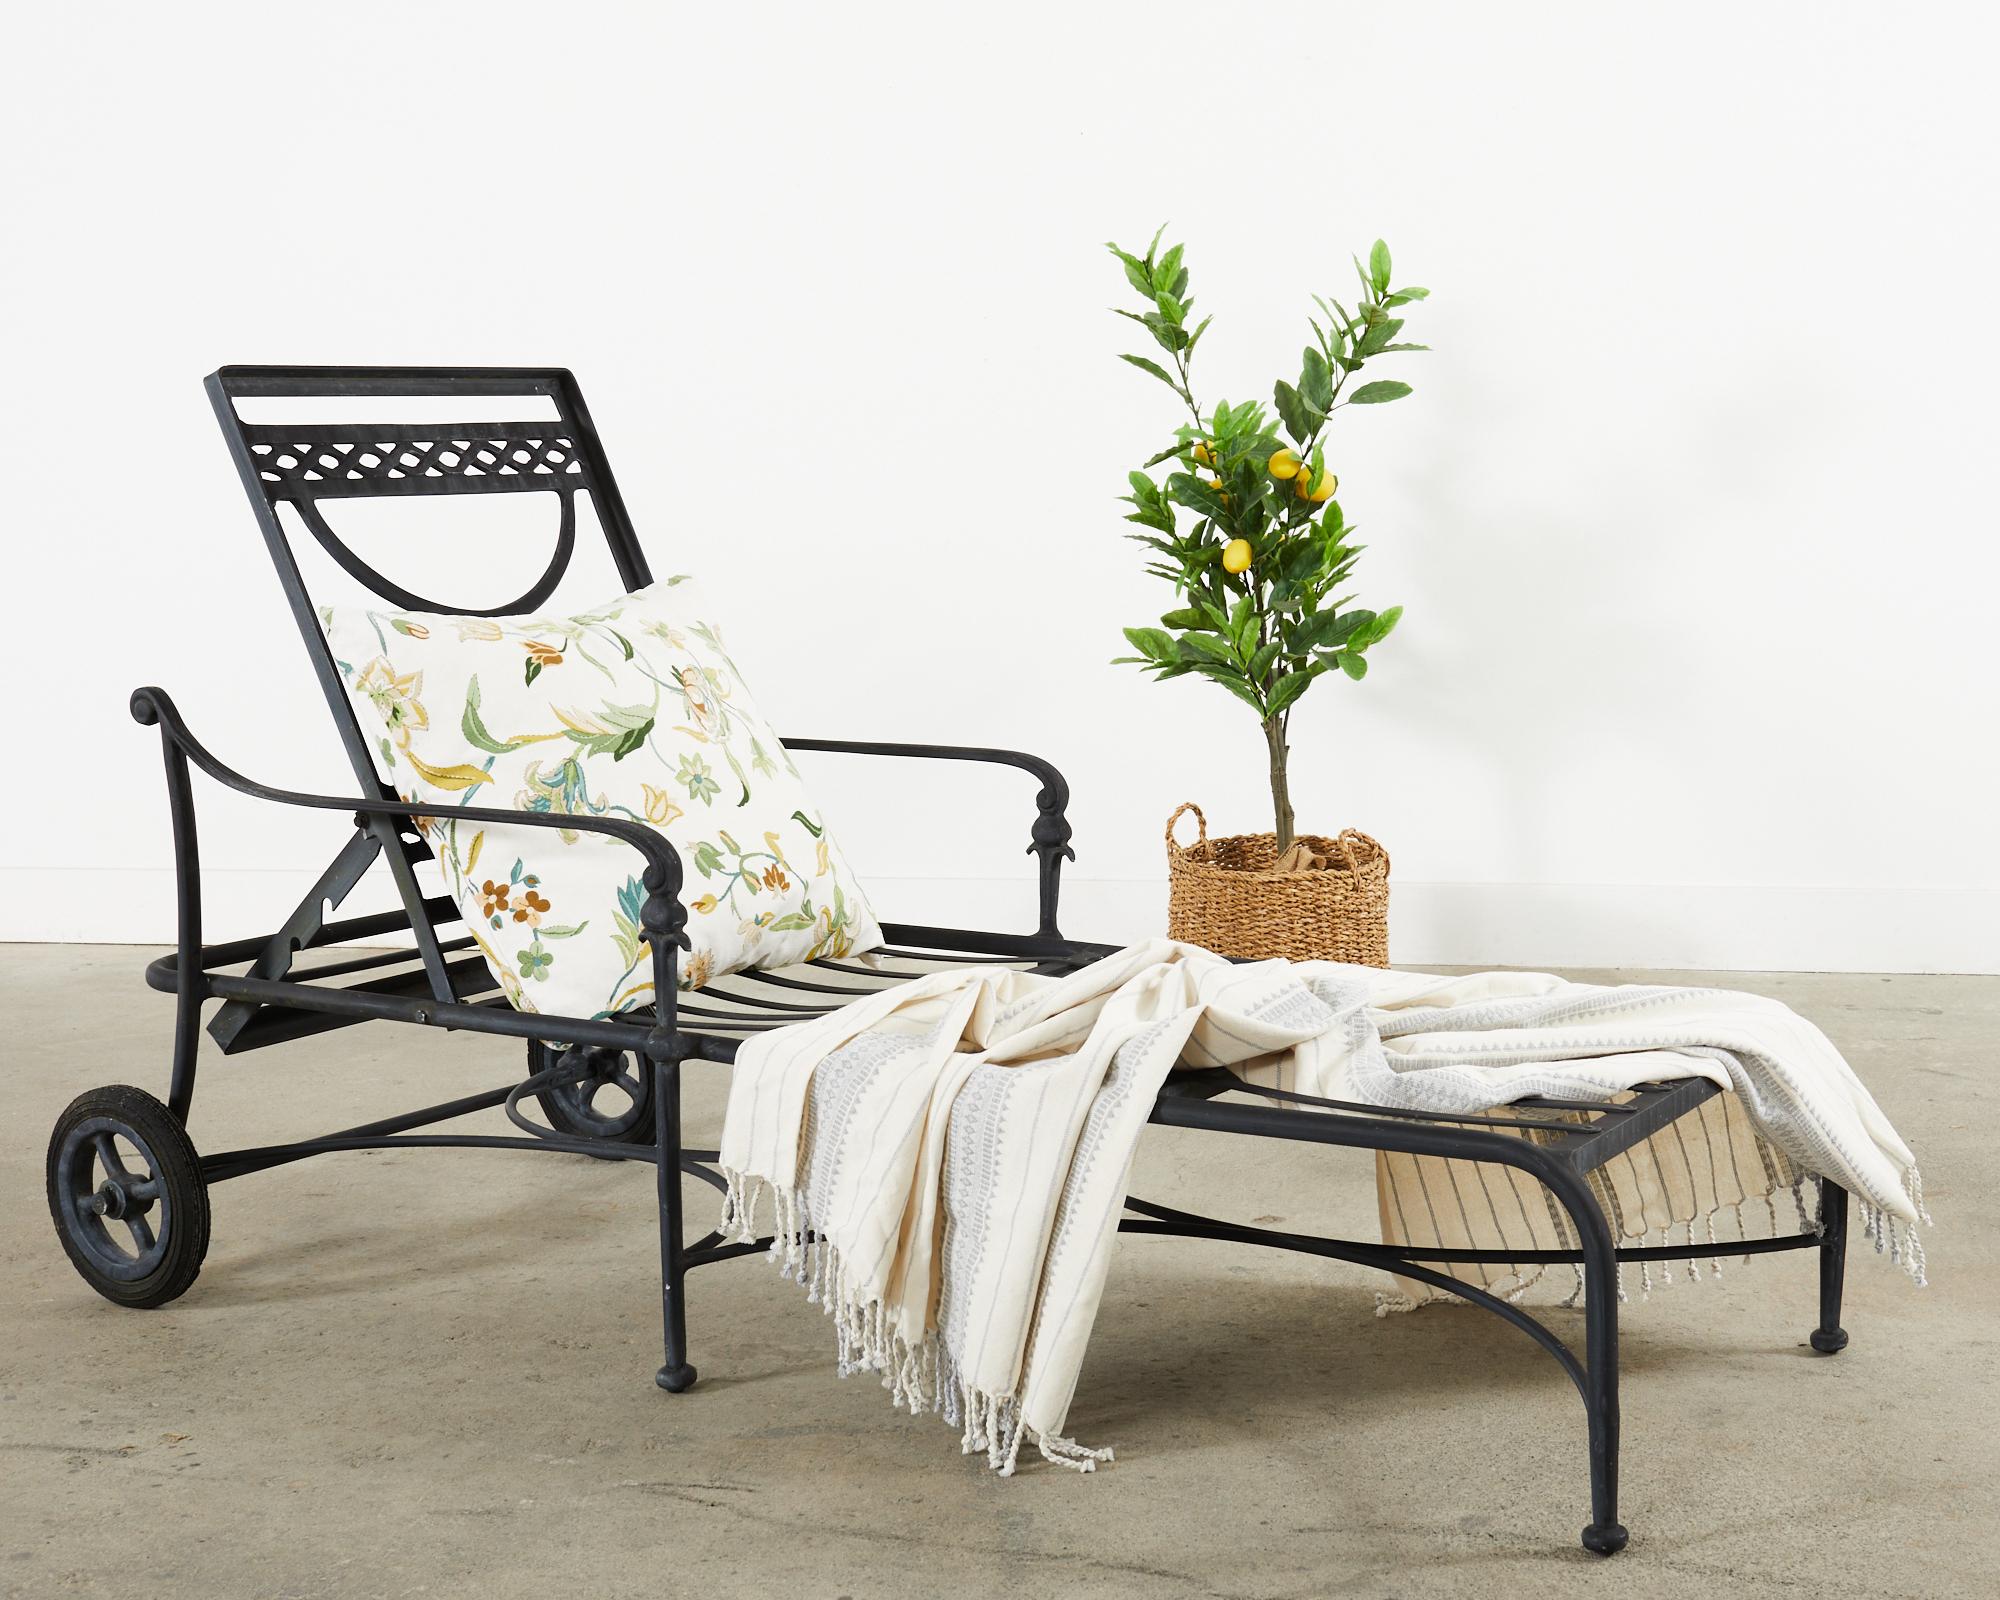 Stylish set of six cast aluminum patio and garden chaise lounges or longues made in the neoclassical taste. The lounges feature a black powder coated finish with an adjustable 3 position back. The generous sized lounges have gracefully curved arms